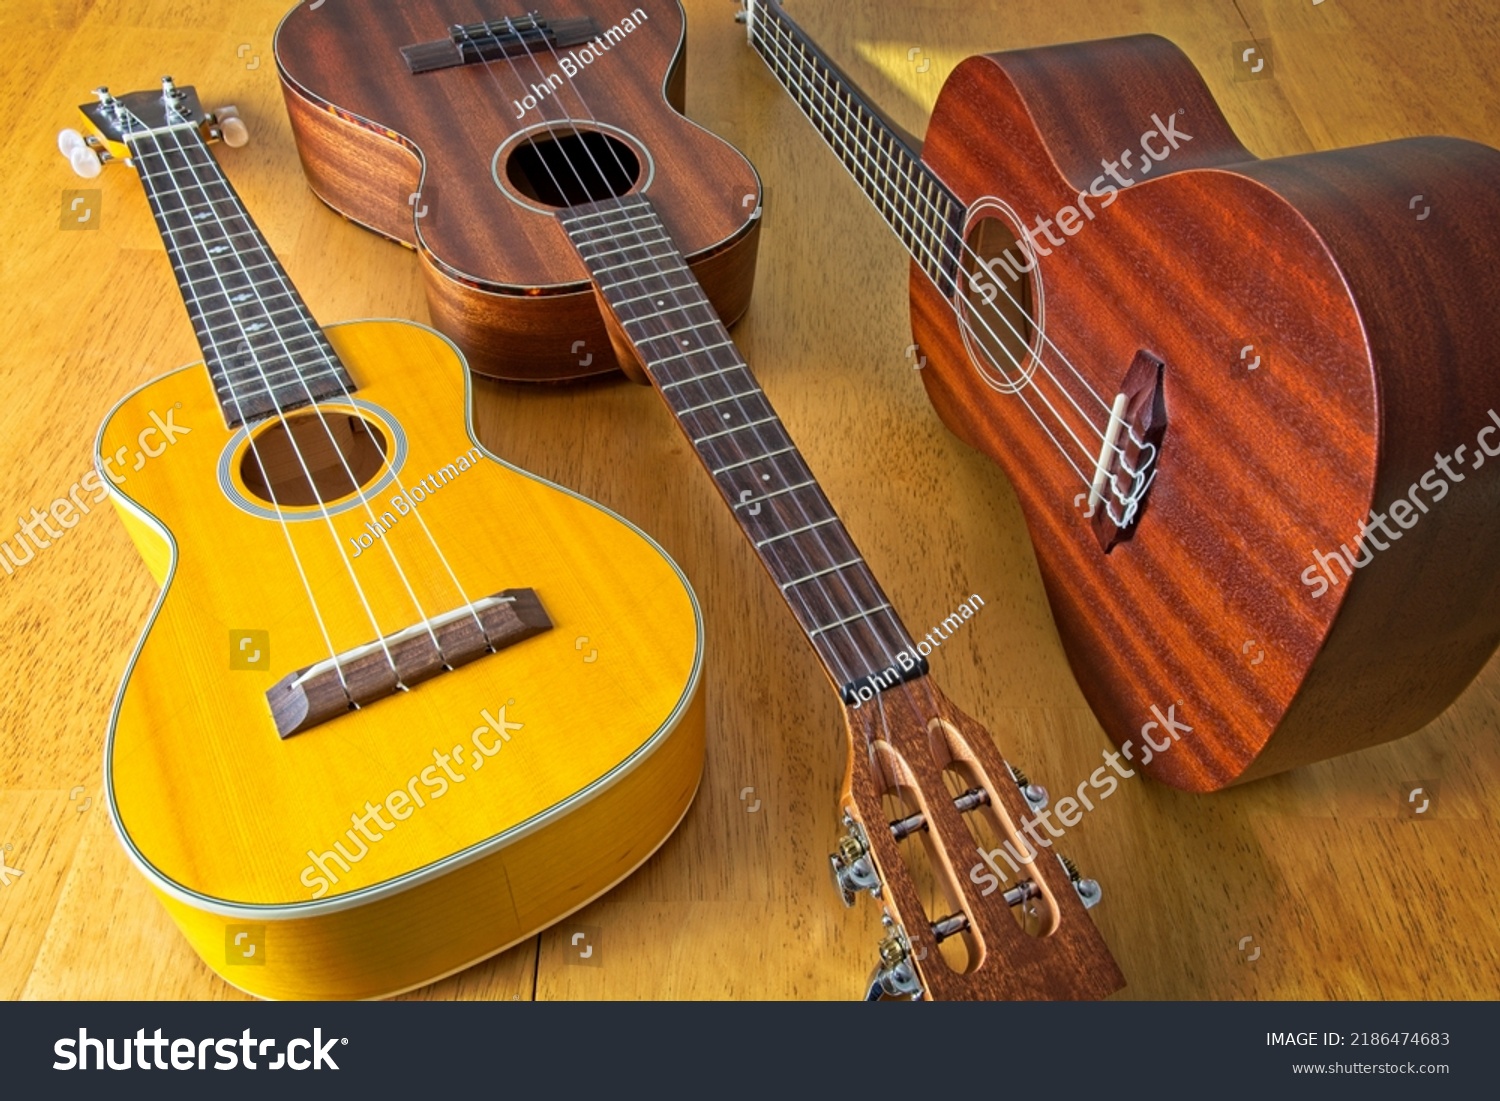 Collection of three ukuleles aligned on sun drenched wooden table top. High angle view. Side lit, showing texture of wood grains. #2186474683